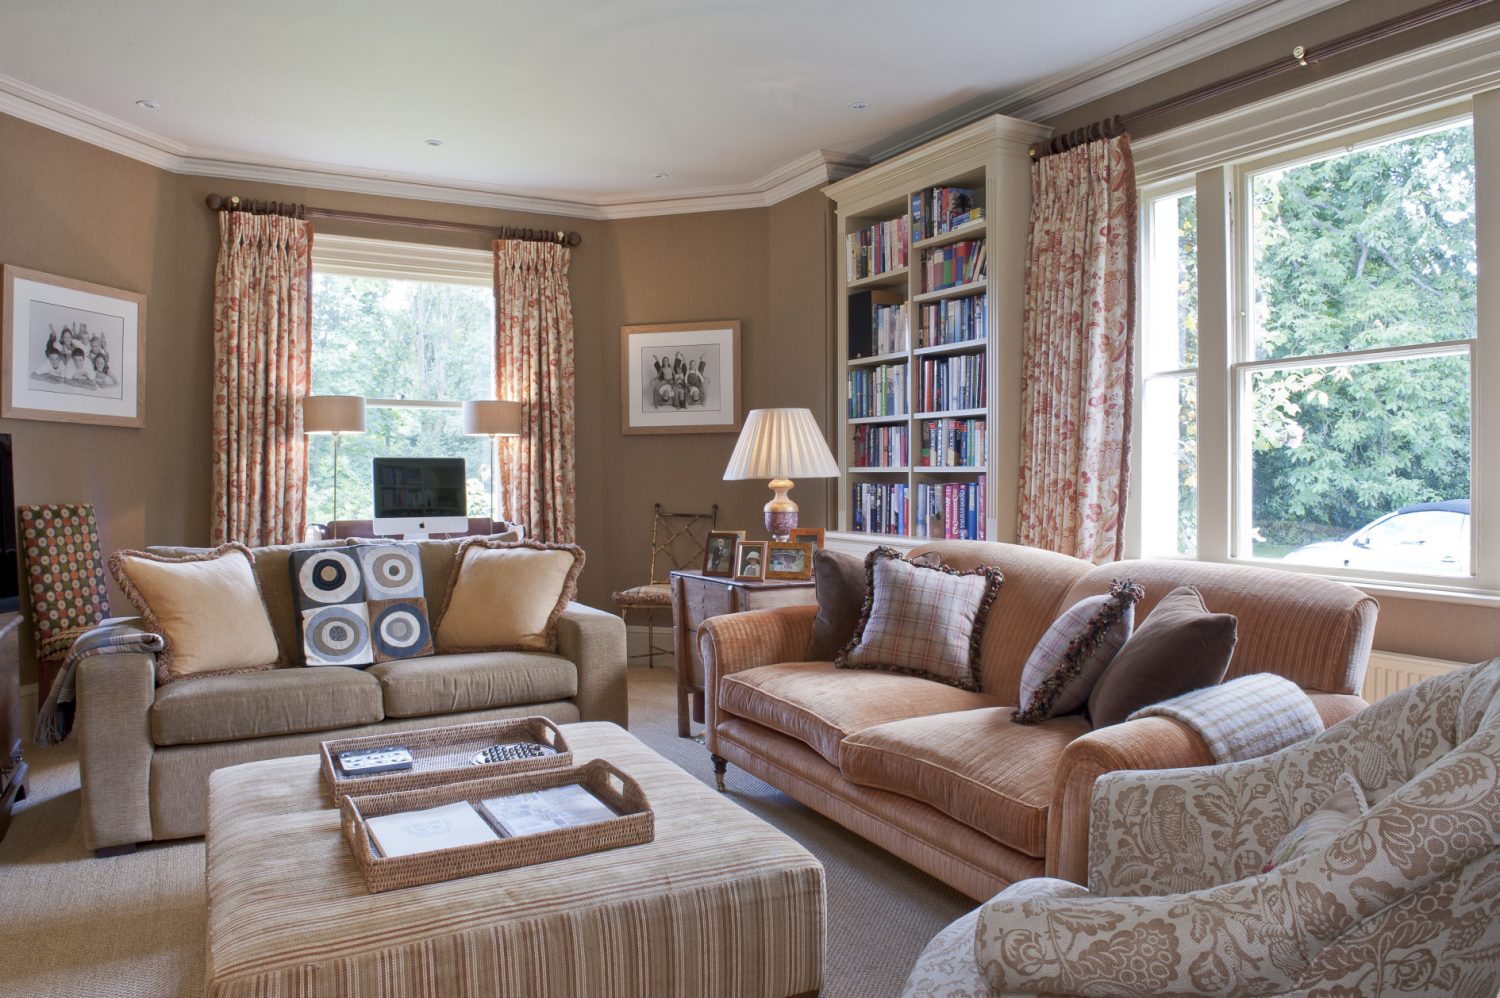 Belinda had the larger sofa in the snug re-upholstered in Lelièvre mogadore velvet so that it is fresh yet still looks like a loved family piece. The walls are hung with Casamance wallpaper giving the room the warmth and appearance of being fabric-lined.